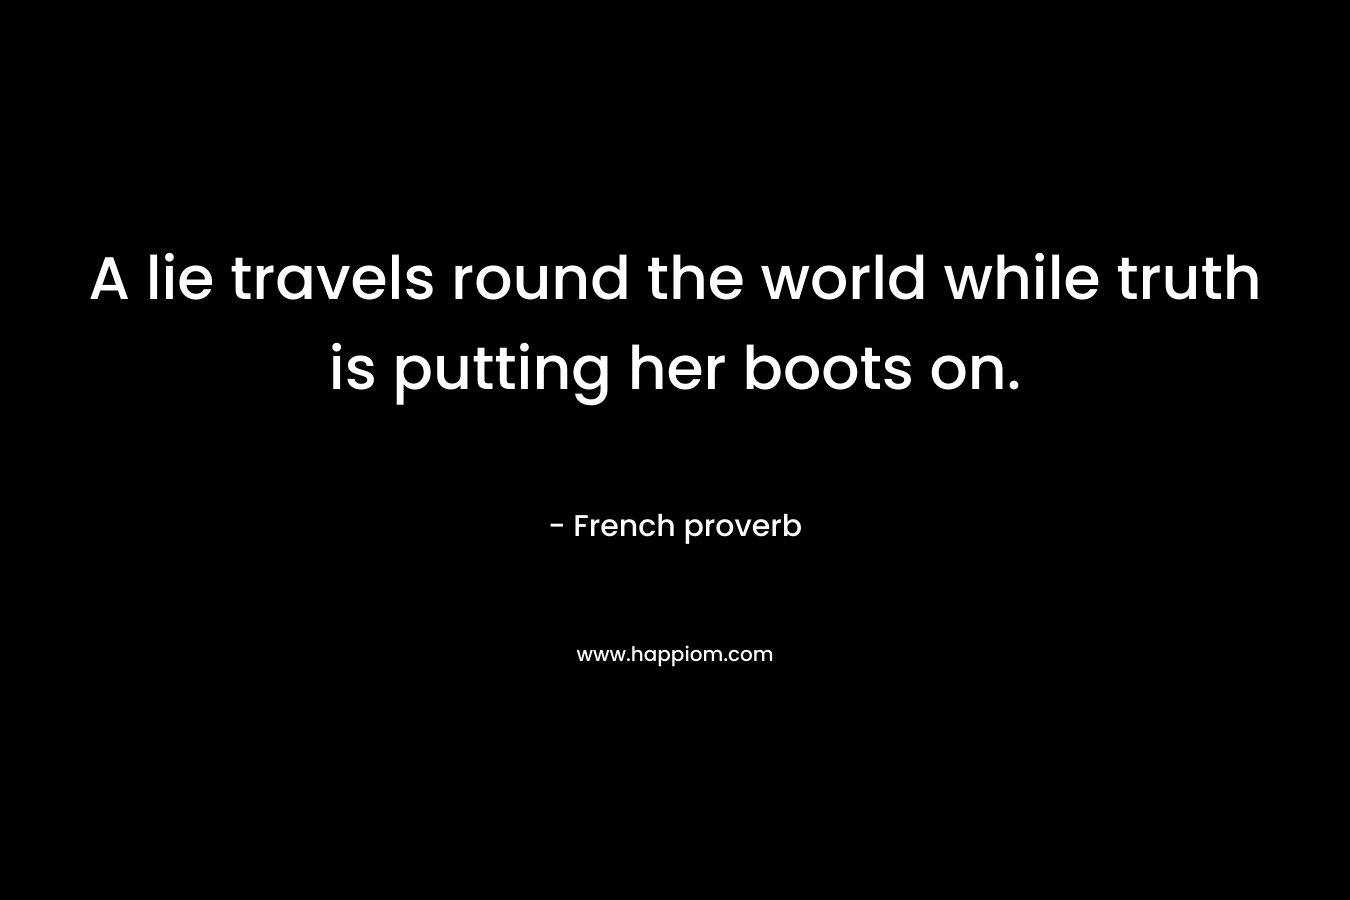 A lie travels round the world while truth is putting her boots on. – French proverb